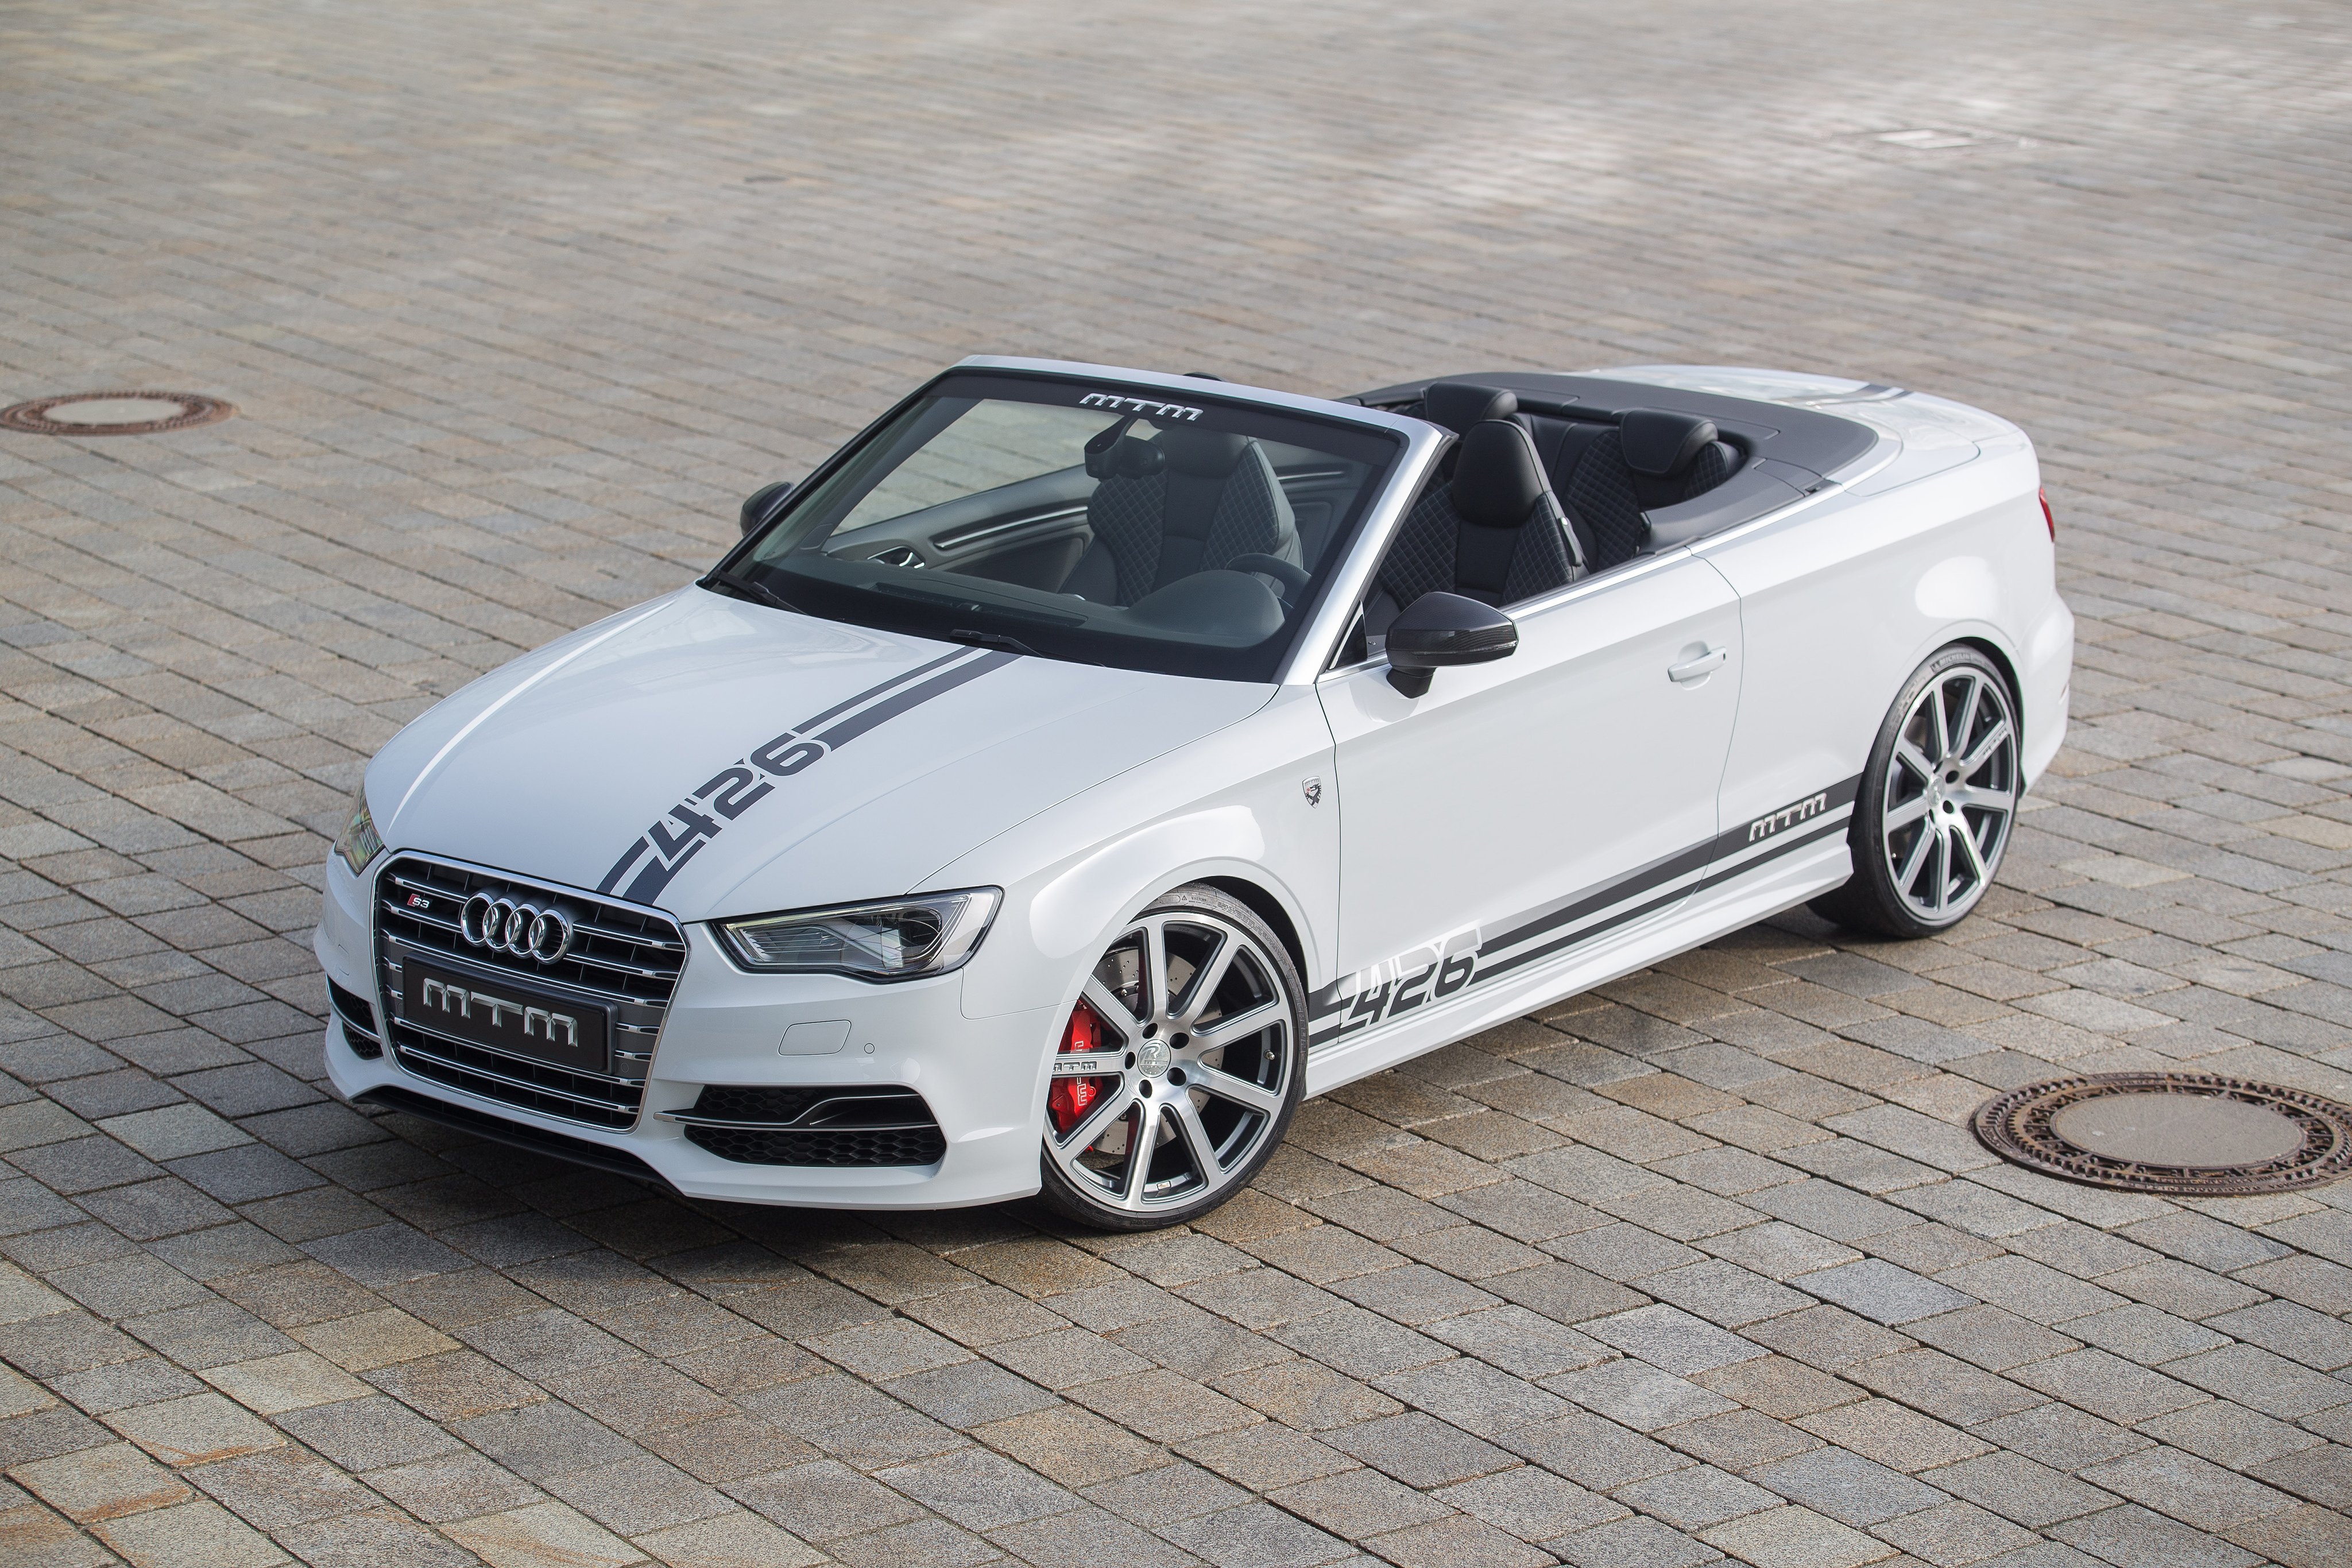 Audi S3 Cabriolet Wallpapers